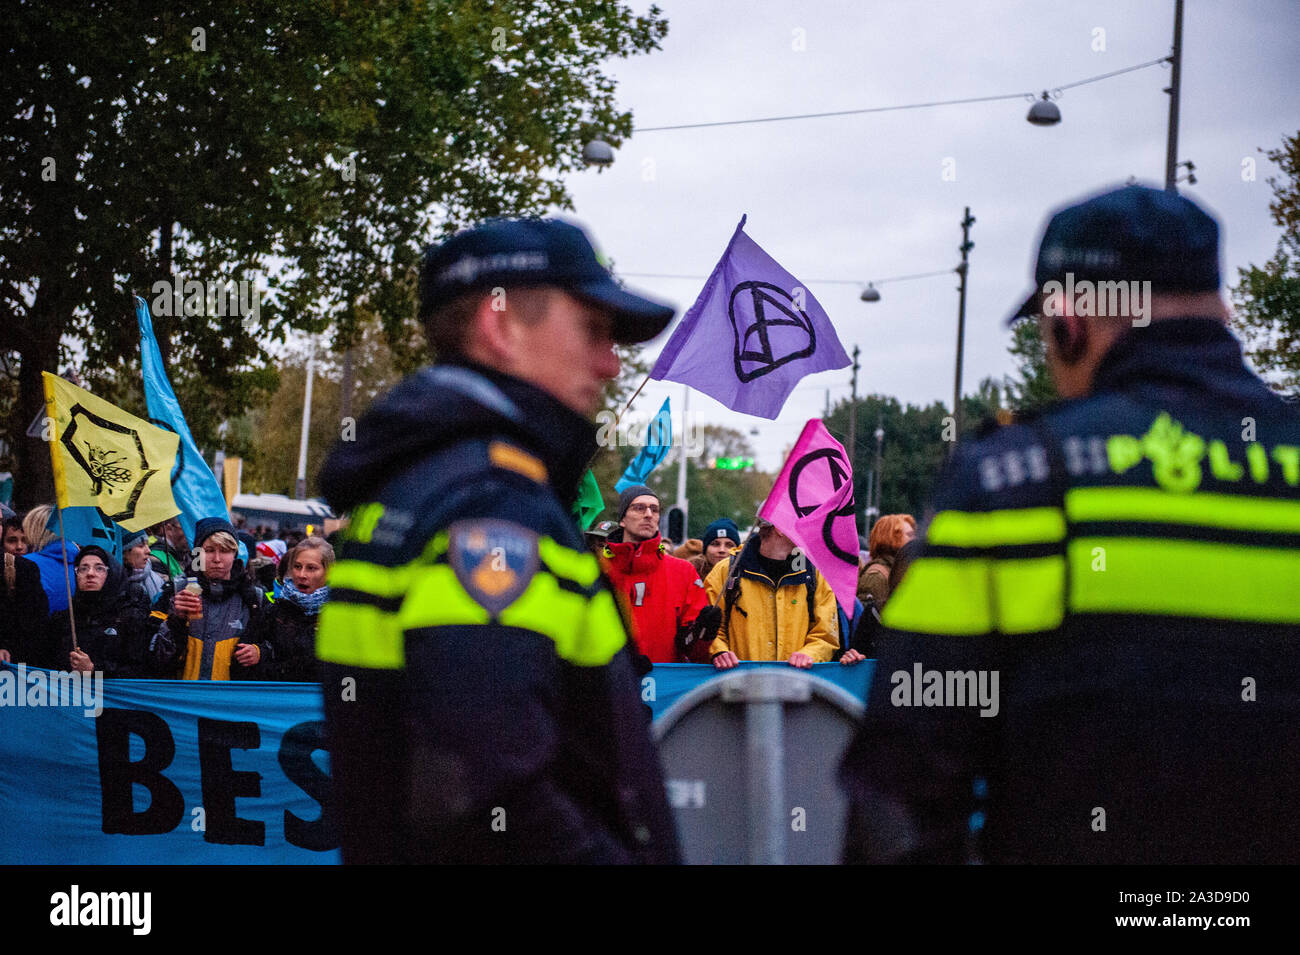 Two Dutch cops speak before the protesters holding a banner and flags during the demonstration.For 2 weeks, Extinction Rebellion and allied movements will gather in major cities across the globe and continue to rebel against the world’s governments for their criminal inaction on the Climate and Ecological Crisis. XR climate activists in Amsterdam are going to organize a large-scale blockade lasting several days on the Museumbrug, in front of the Rijksmuseum. From early in the morning, hundreds of XR activists showed up on the bridge, where there was a visible police presence. The Environmental Stock Photo